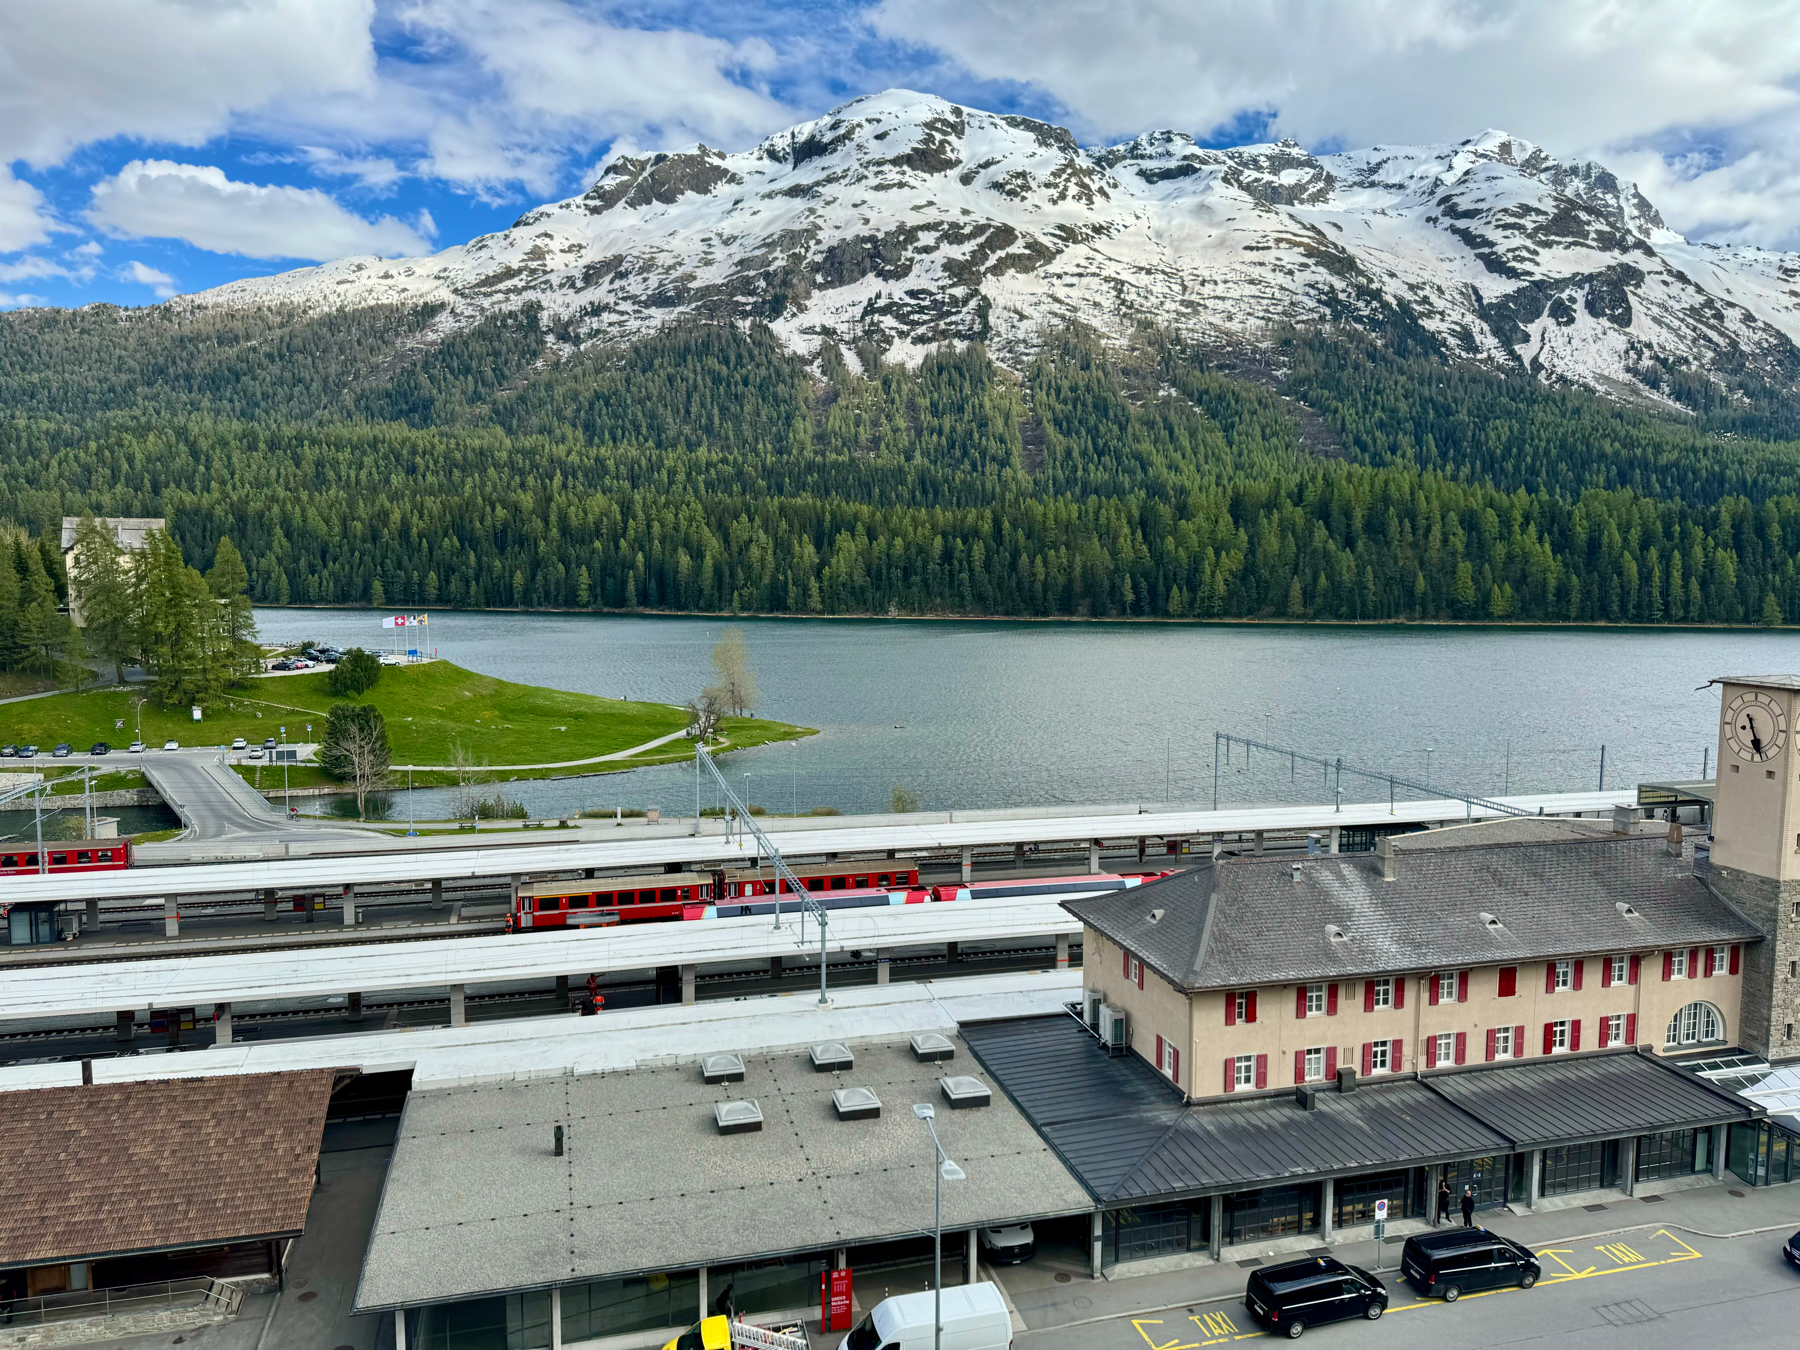 A train station with red trains, a lake, a forest, and snow-capped mountains in the background.